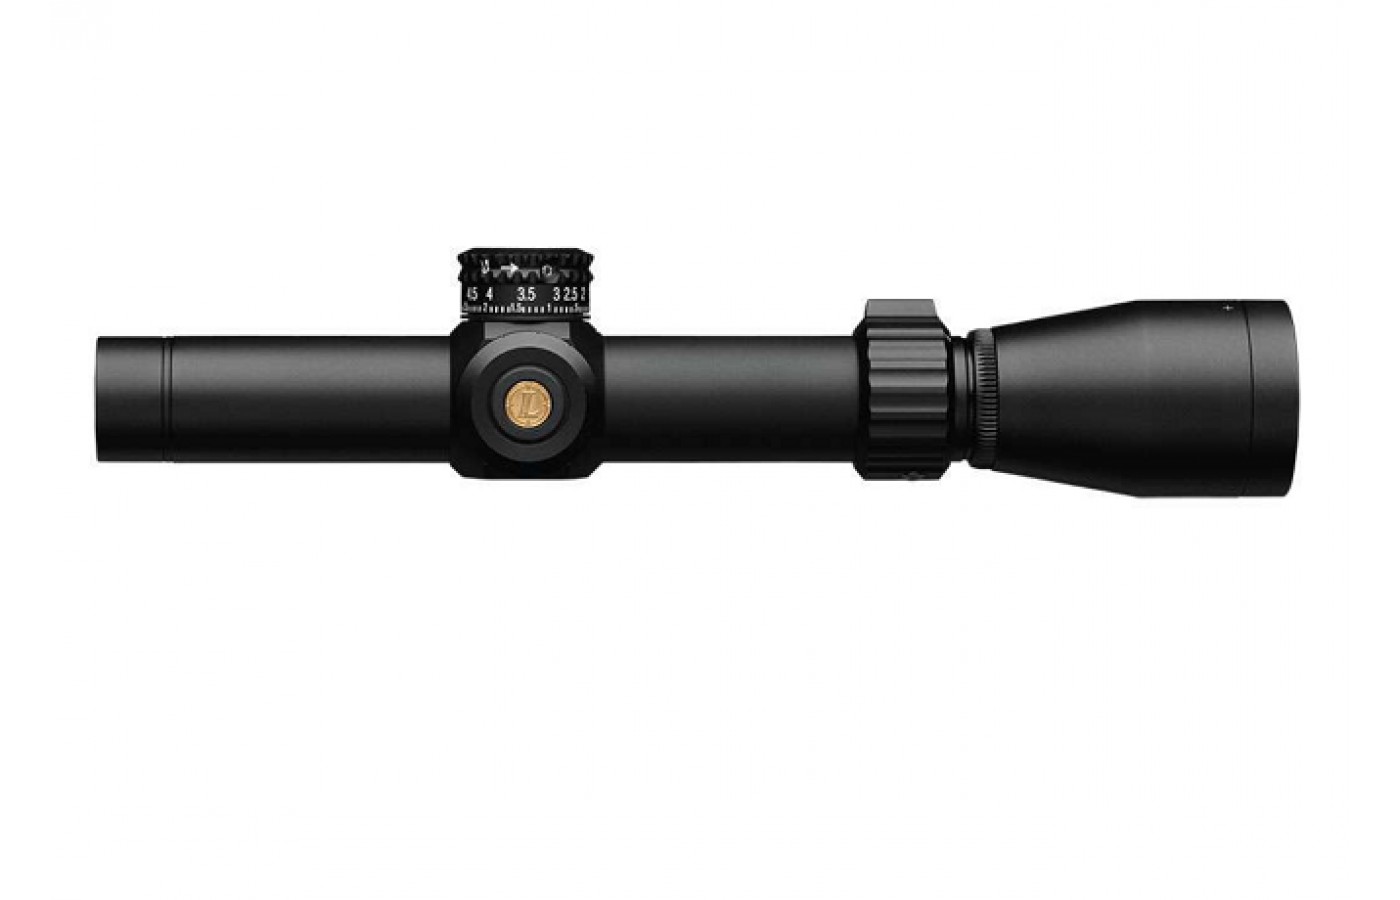 The Leupold Mark AR has easy access to quick illumination at the touch of a finger.